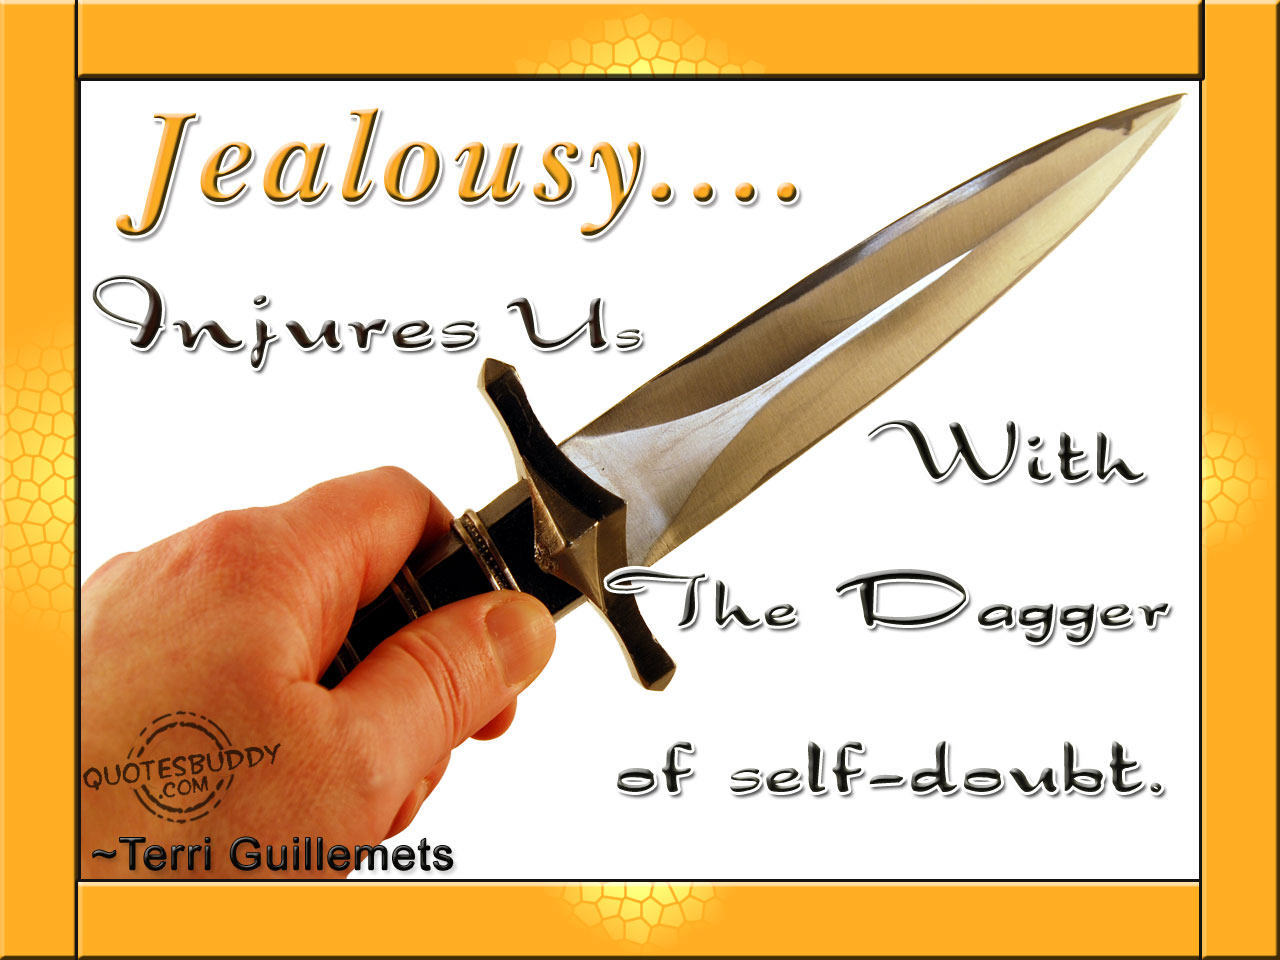 Jealousy Injures Us With The Dagger Of Self – Doubt. Terri Guillemets